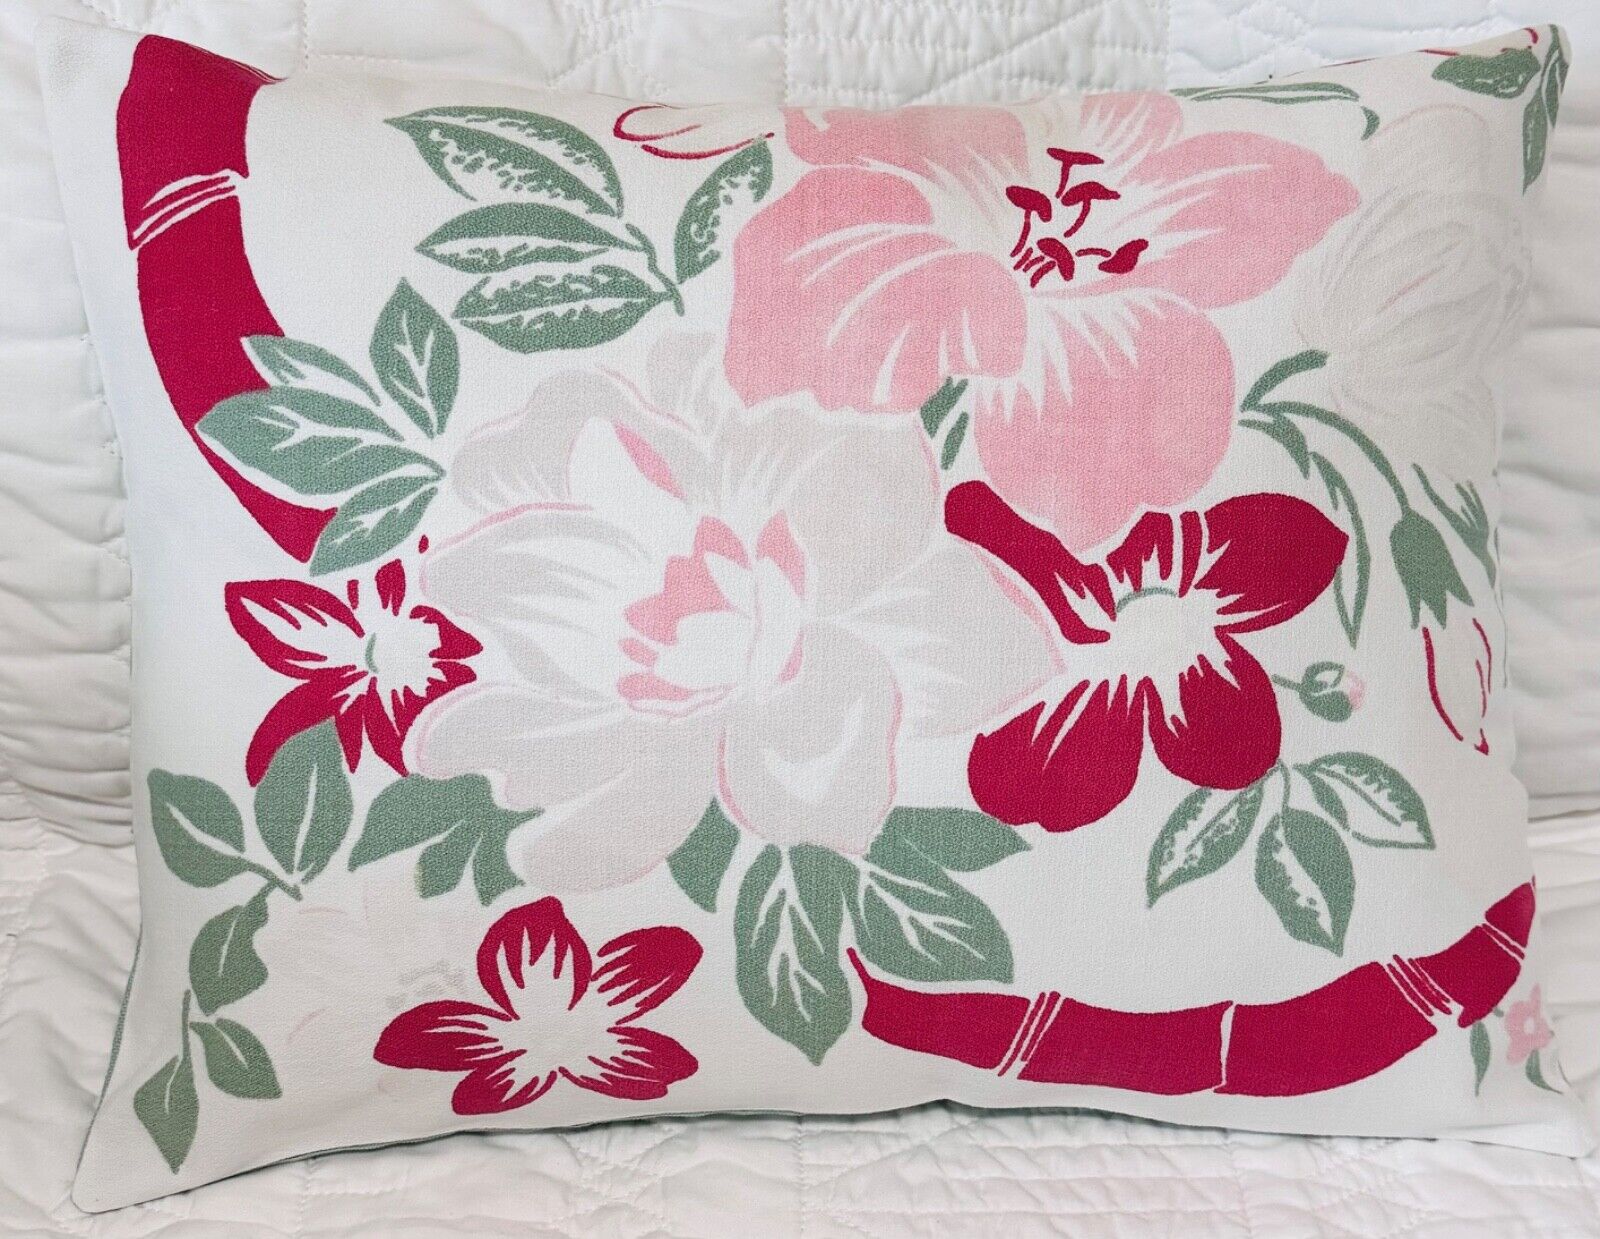 Vintage Tablecloth Pillow Cover - Pink, White, red, Floral w/ Red Ribbon